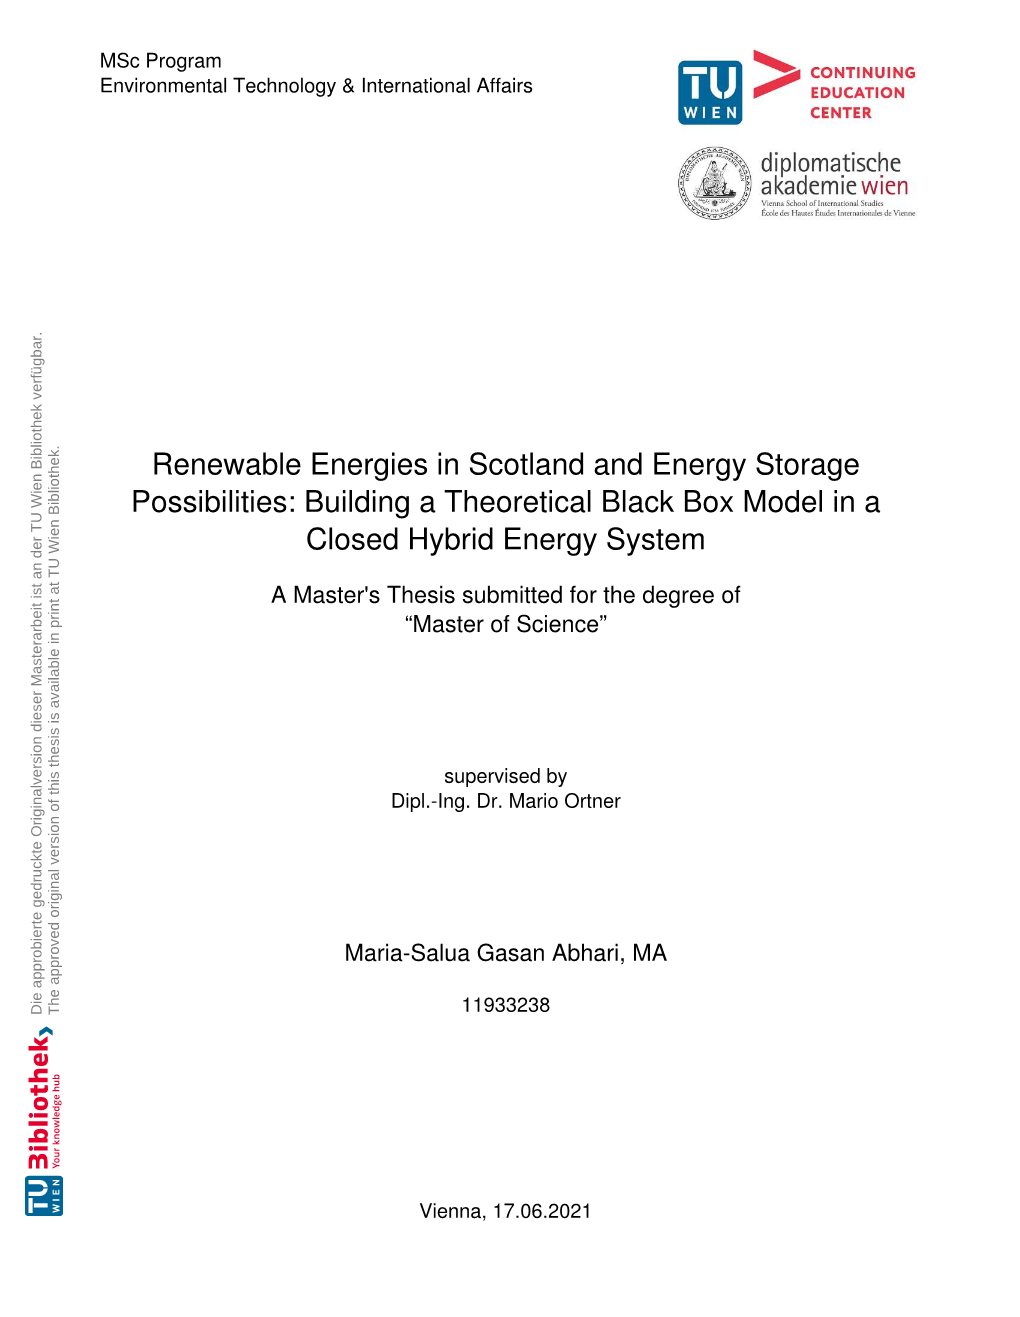 Renewable Energies in Scotland and Energy Storage Possibilities: Building a Theoretical Black Box Model in a Closed Hybrid Energy System